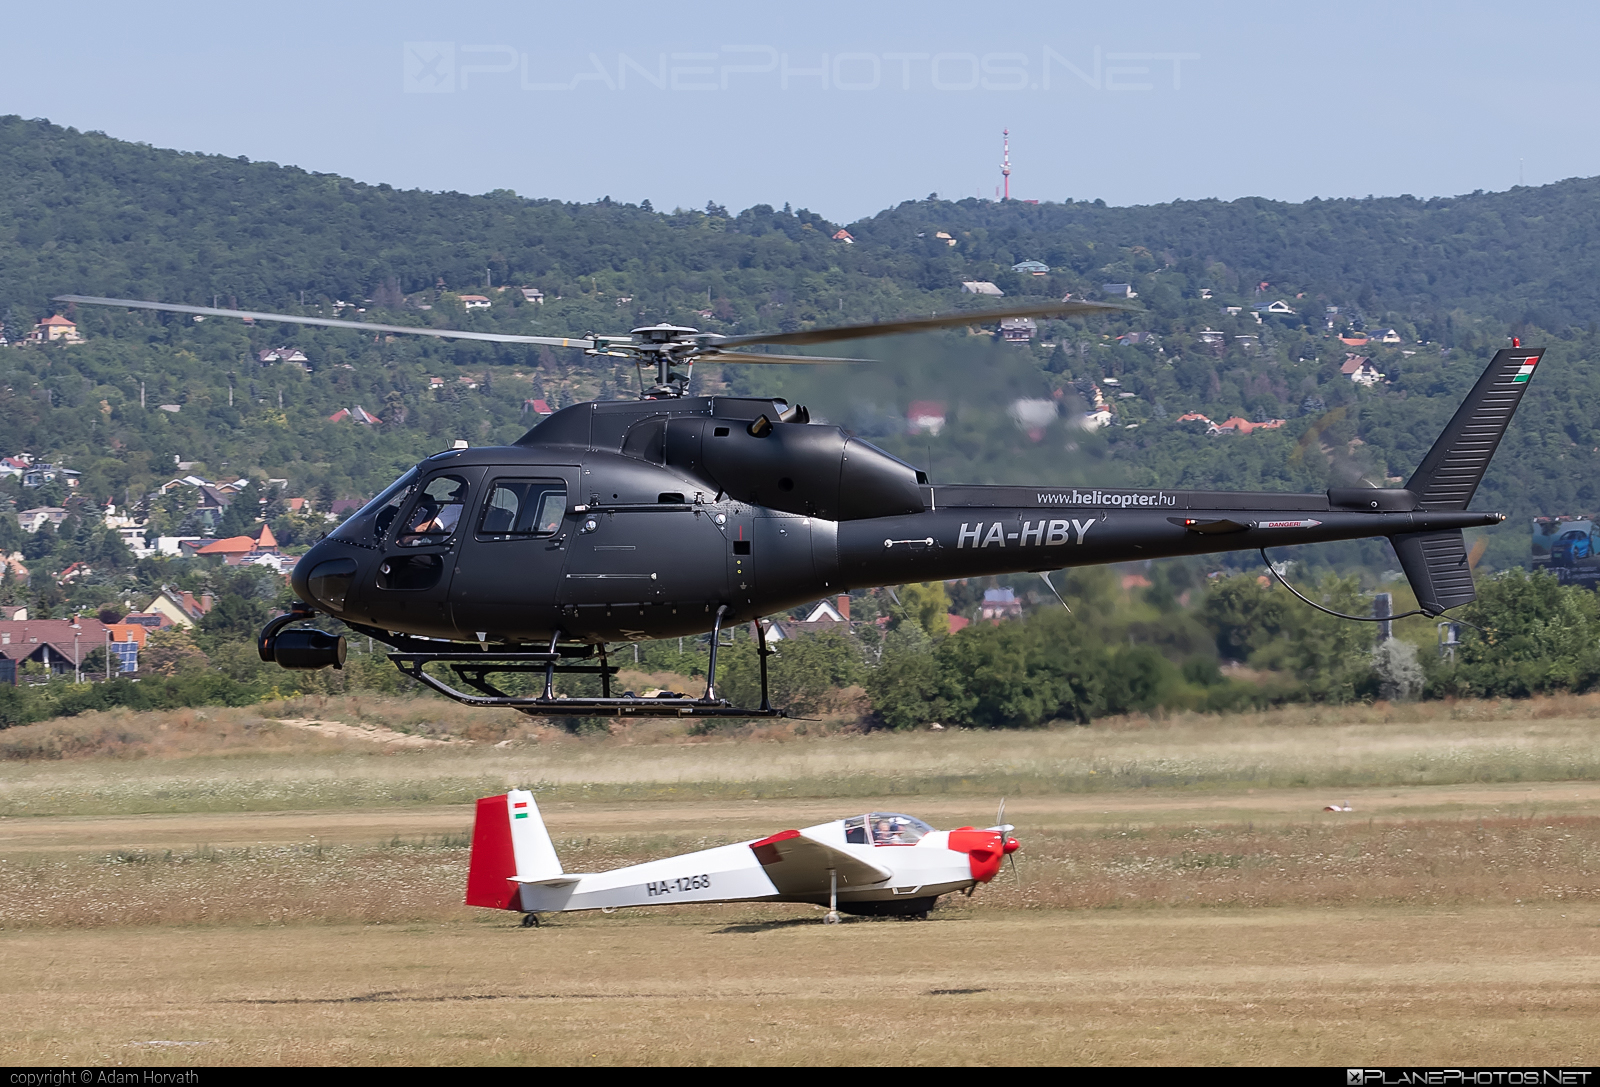 Aerospatiale AS355 F2 Ecureuil 2 - HA-HBY operated by Fly4Less Helicopter #aerospatiale #aerospatialeecureuil #as355 #as355ecureuil2 #as355f2 #as355f2ecureuil2 #ecureuil2 #fly4lesshelicopter